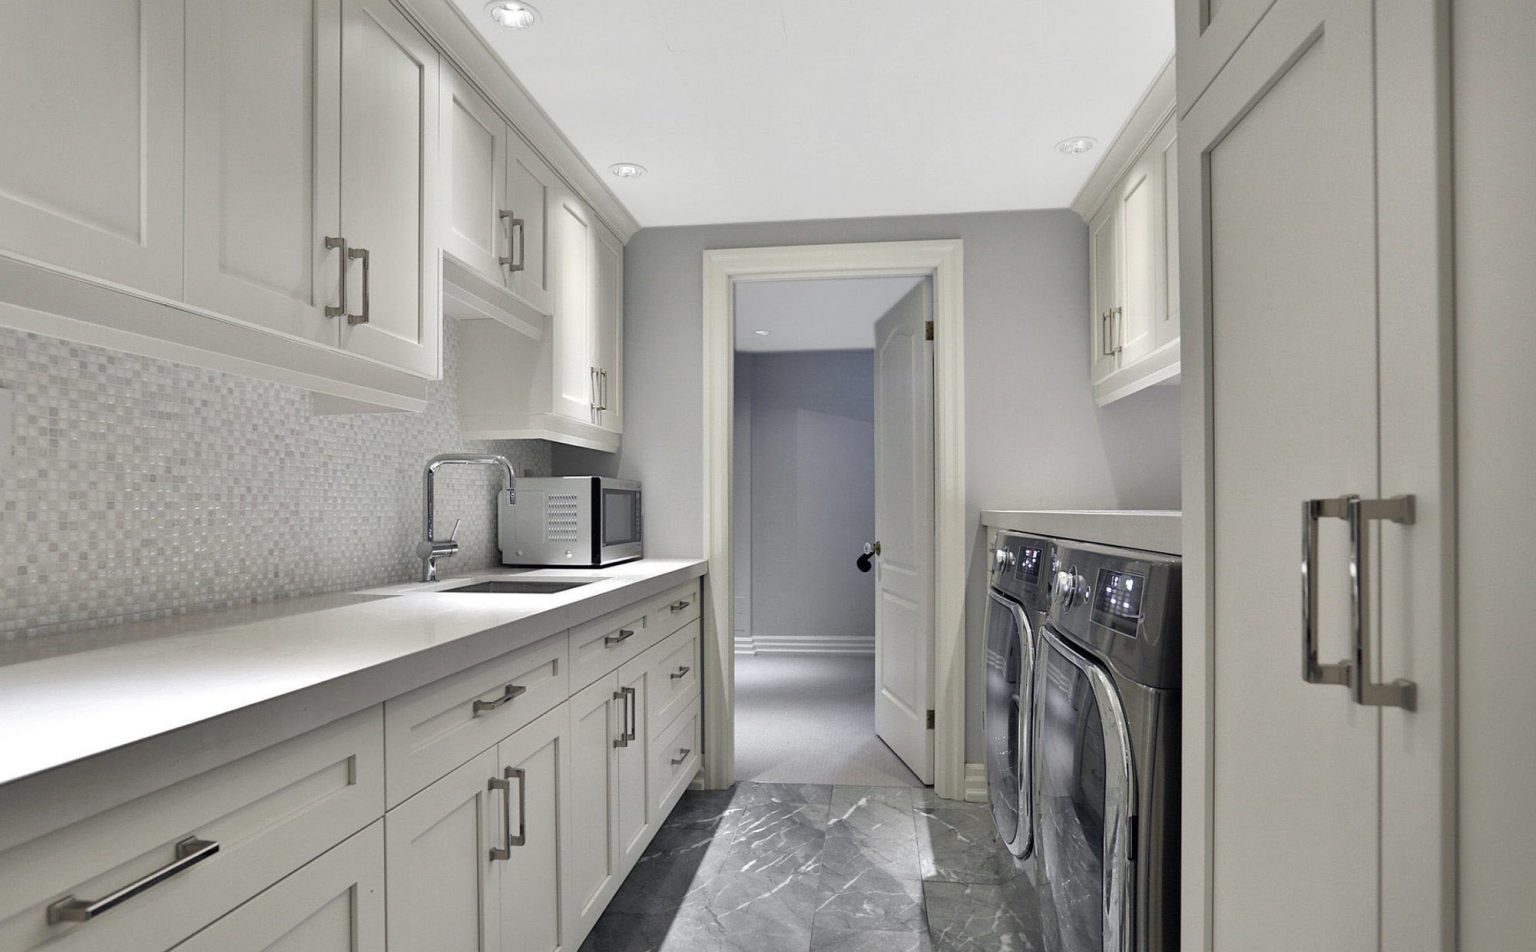 Laundry Room Design Tips | Style, Ideas, Tips & Pictures